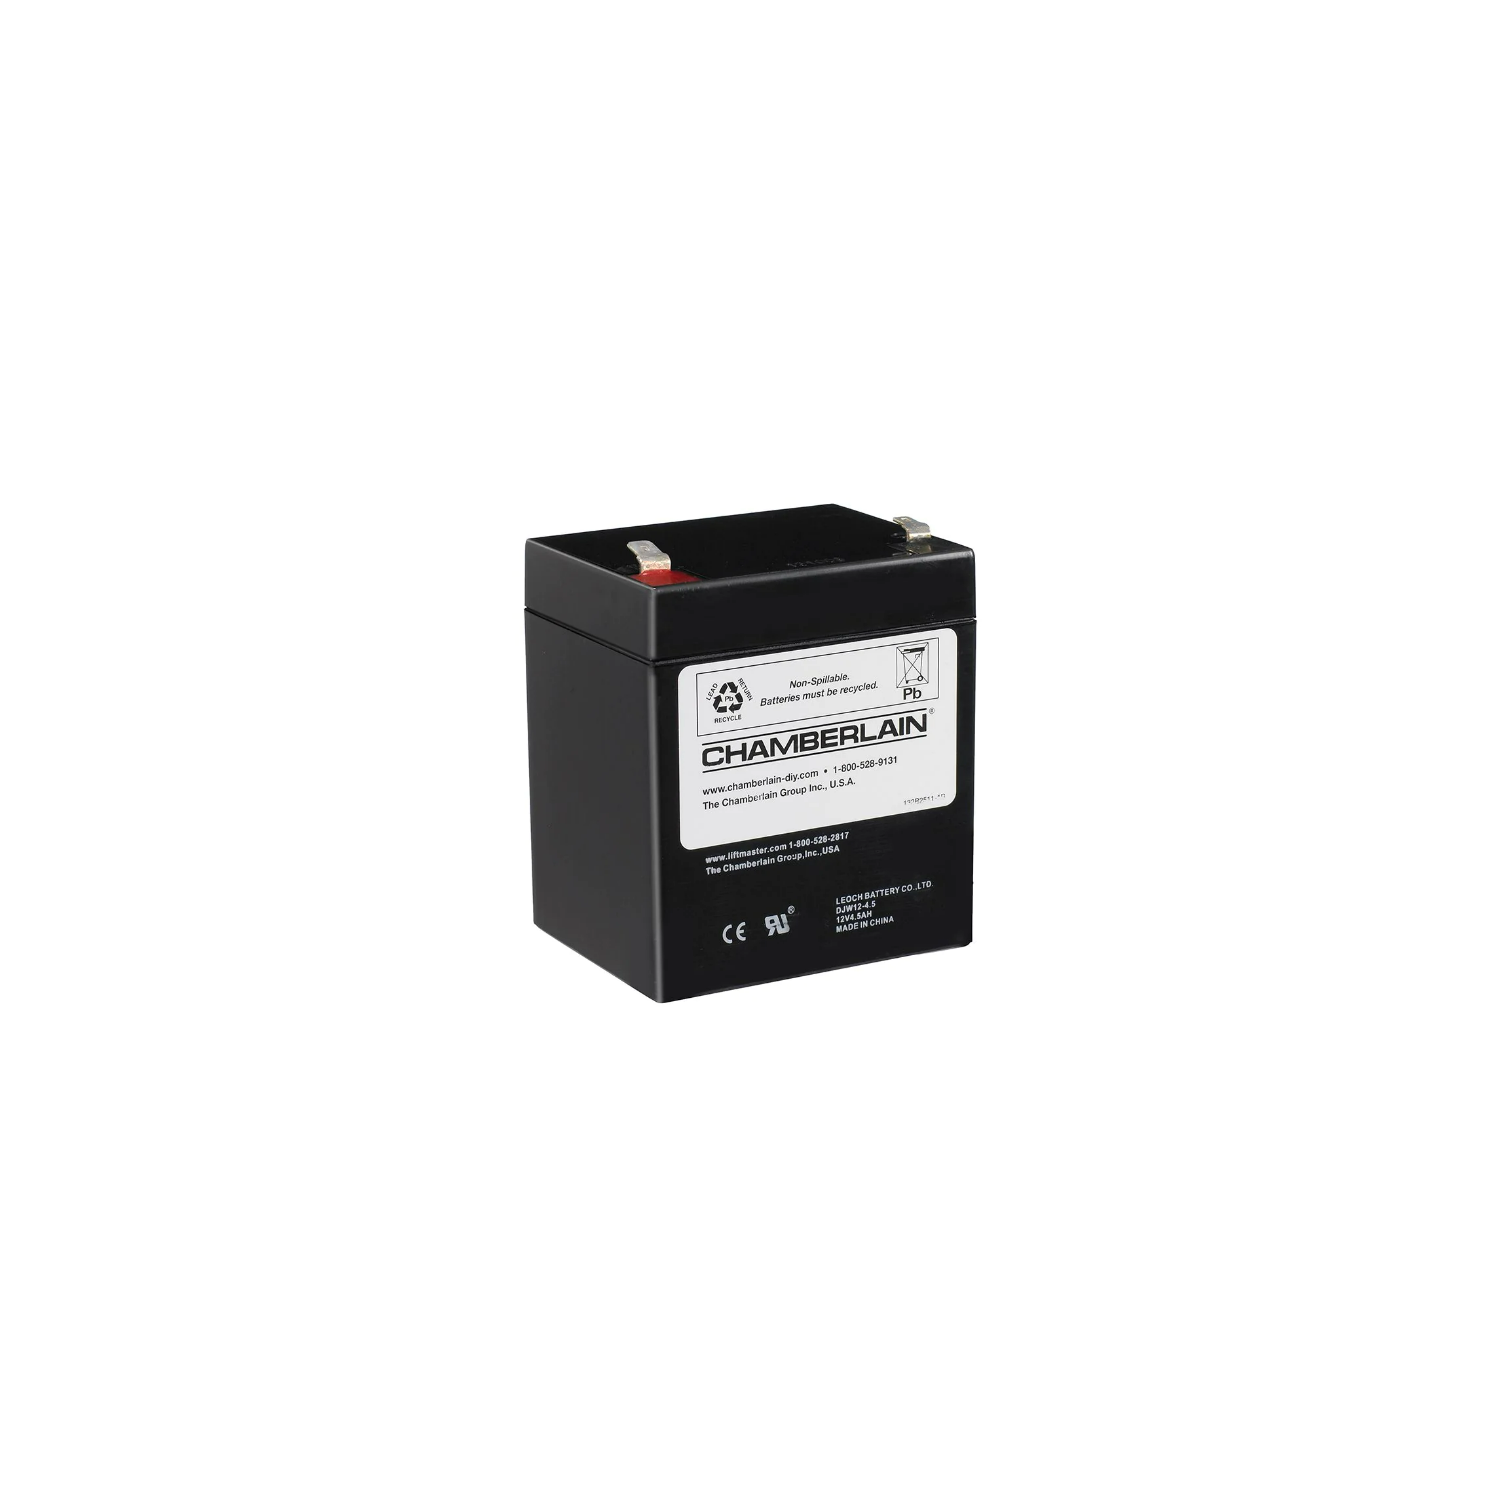 Chamberlain 4228 Replacement Battery for Garage Access Systems